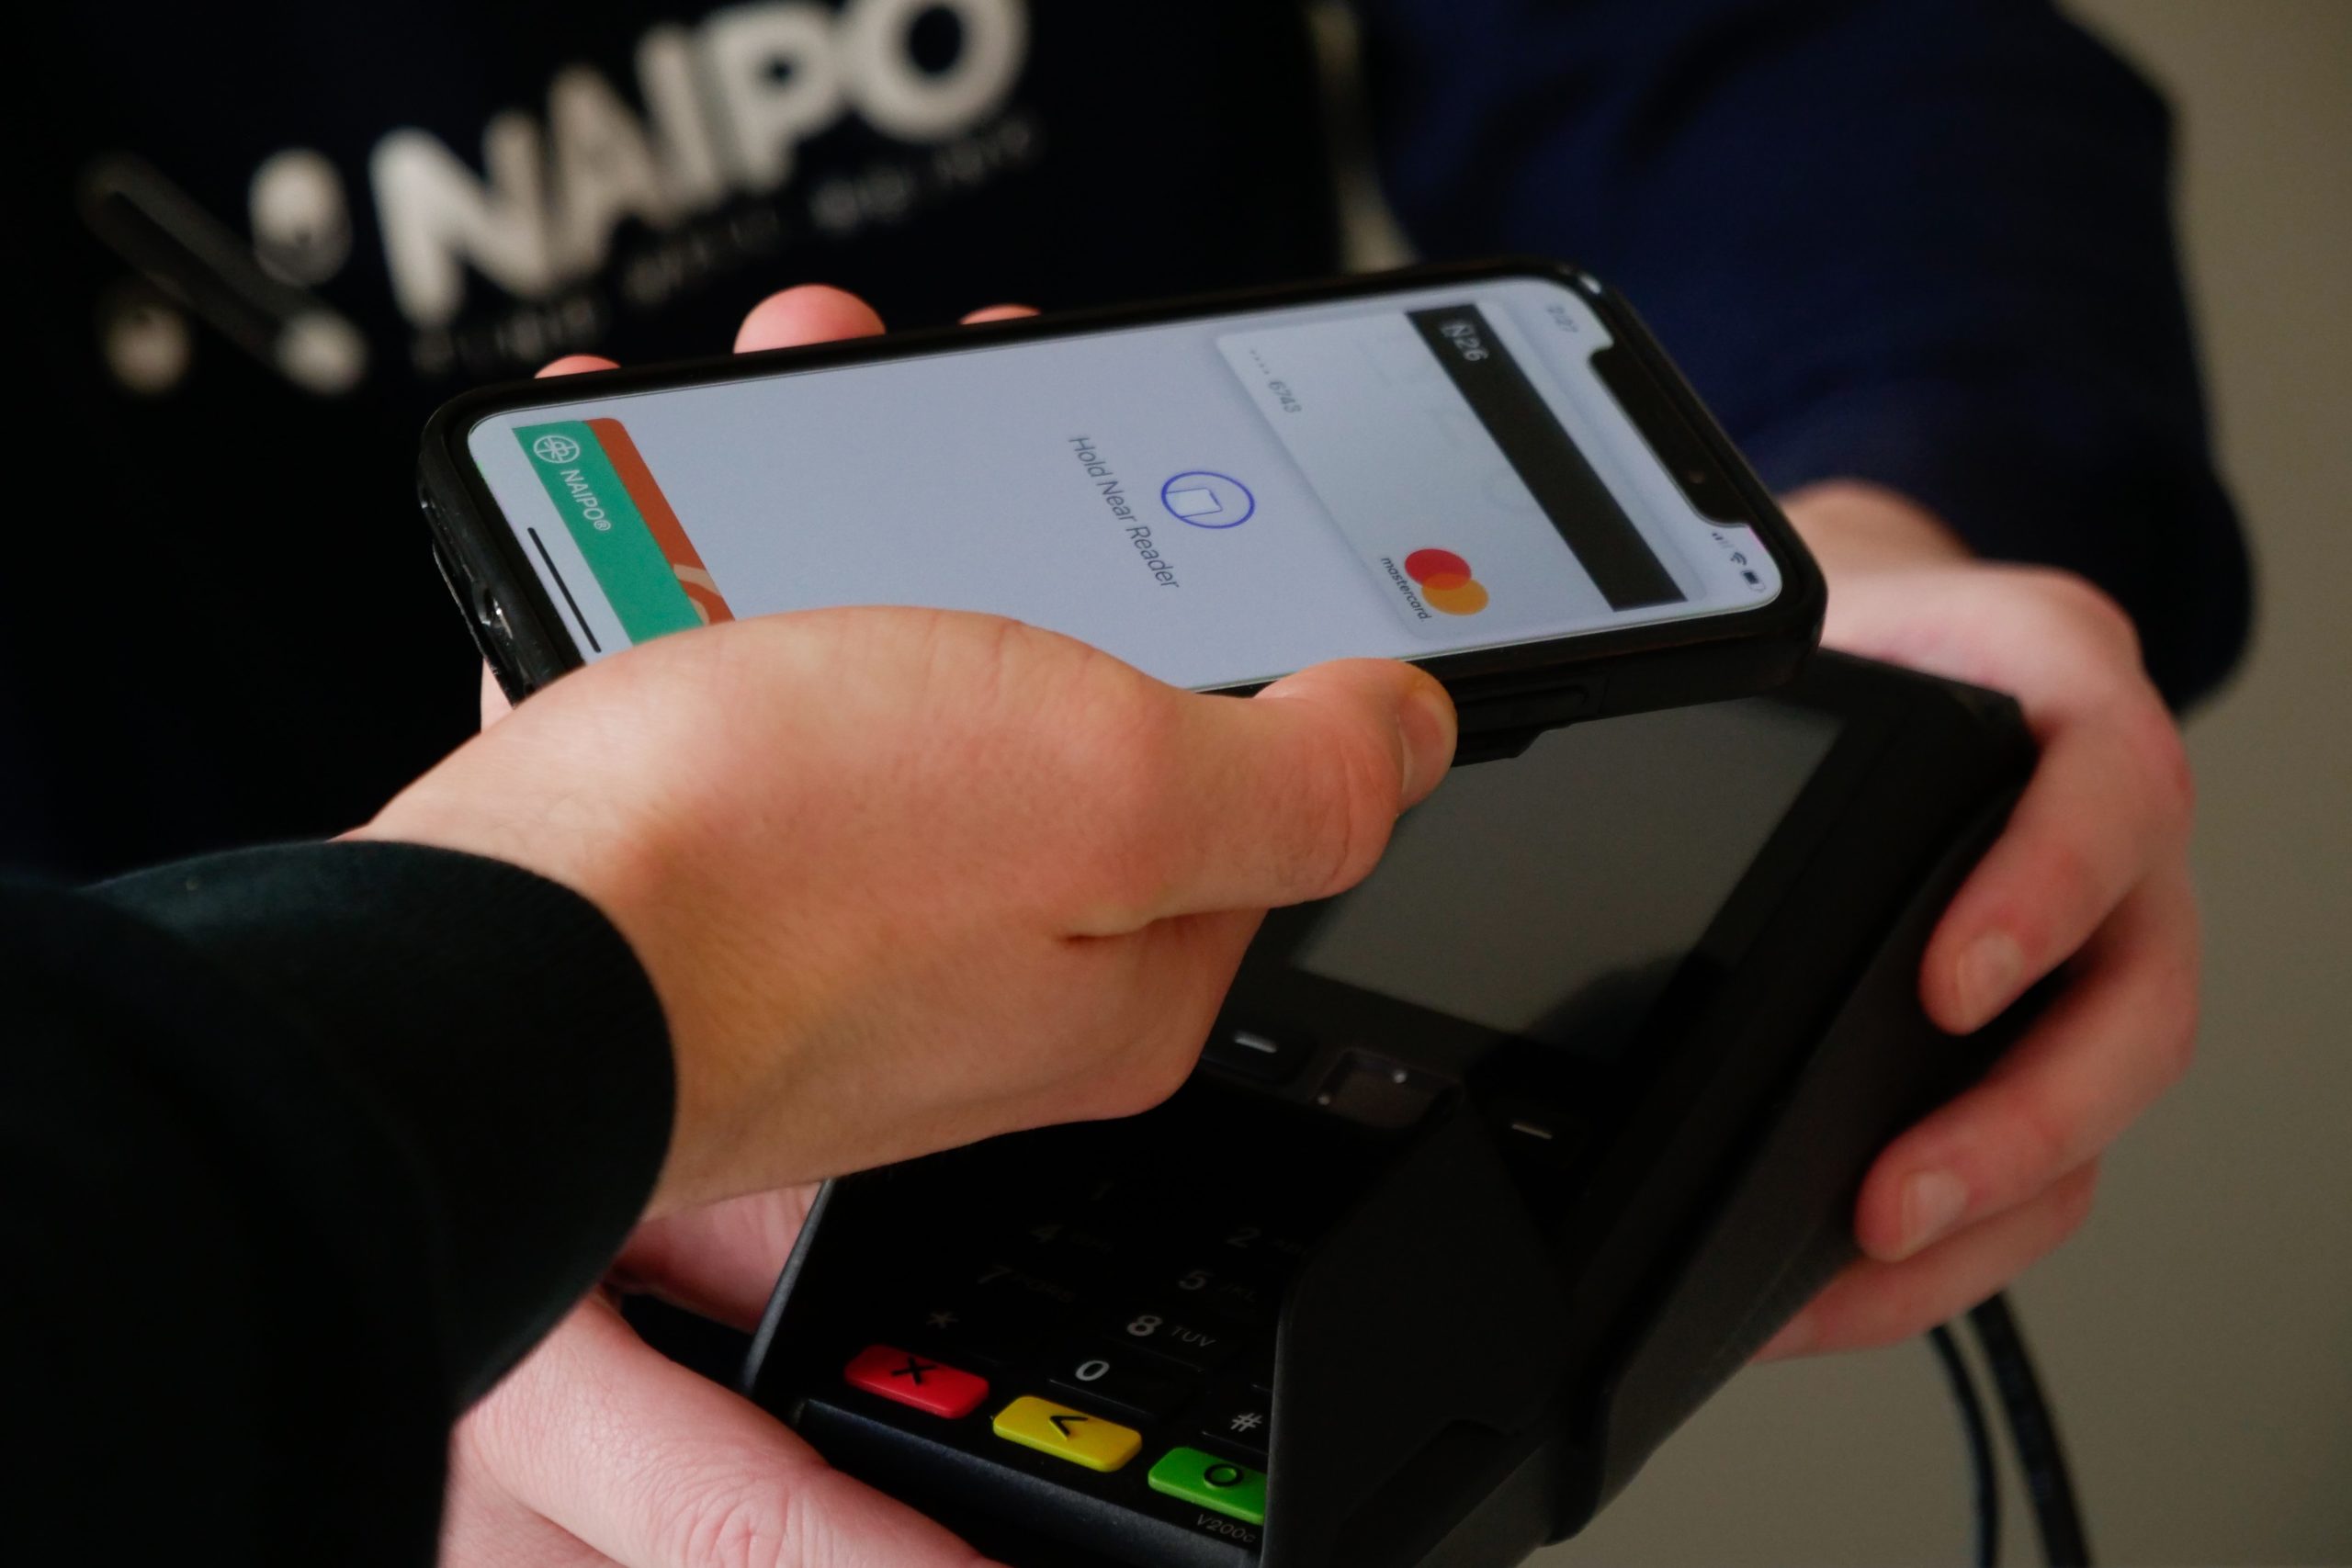 person holding a black phone with card tap feature to pay for a transaction